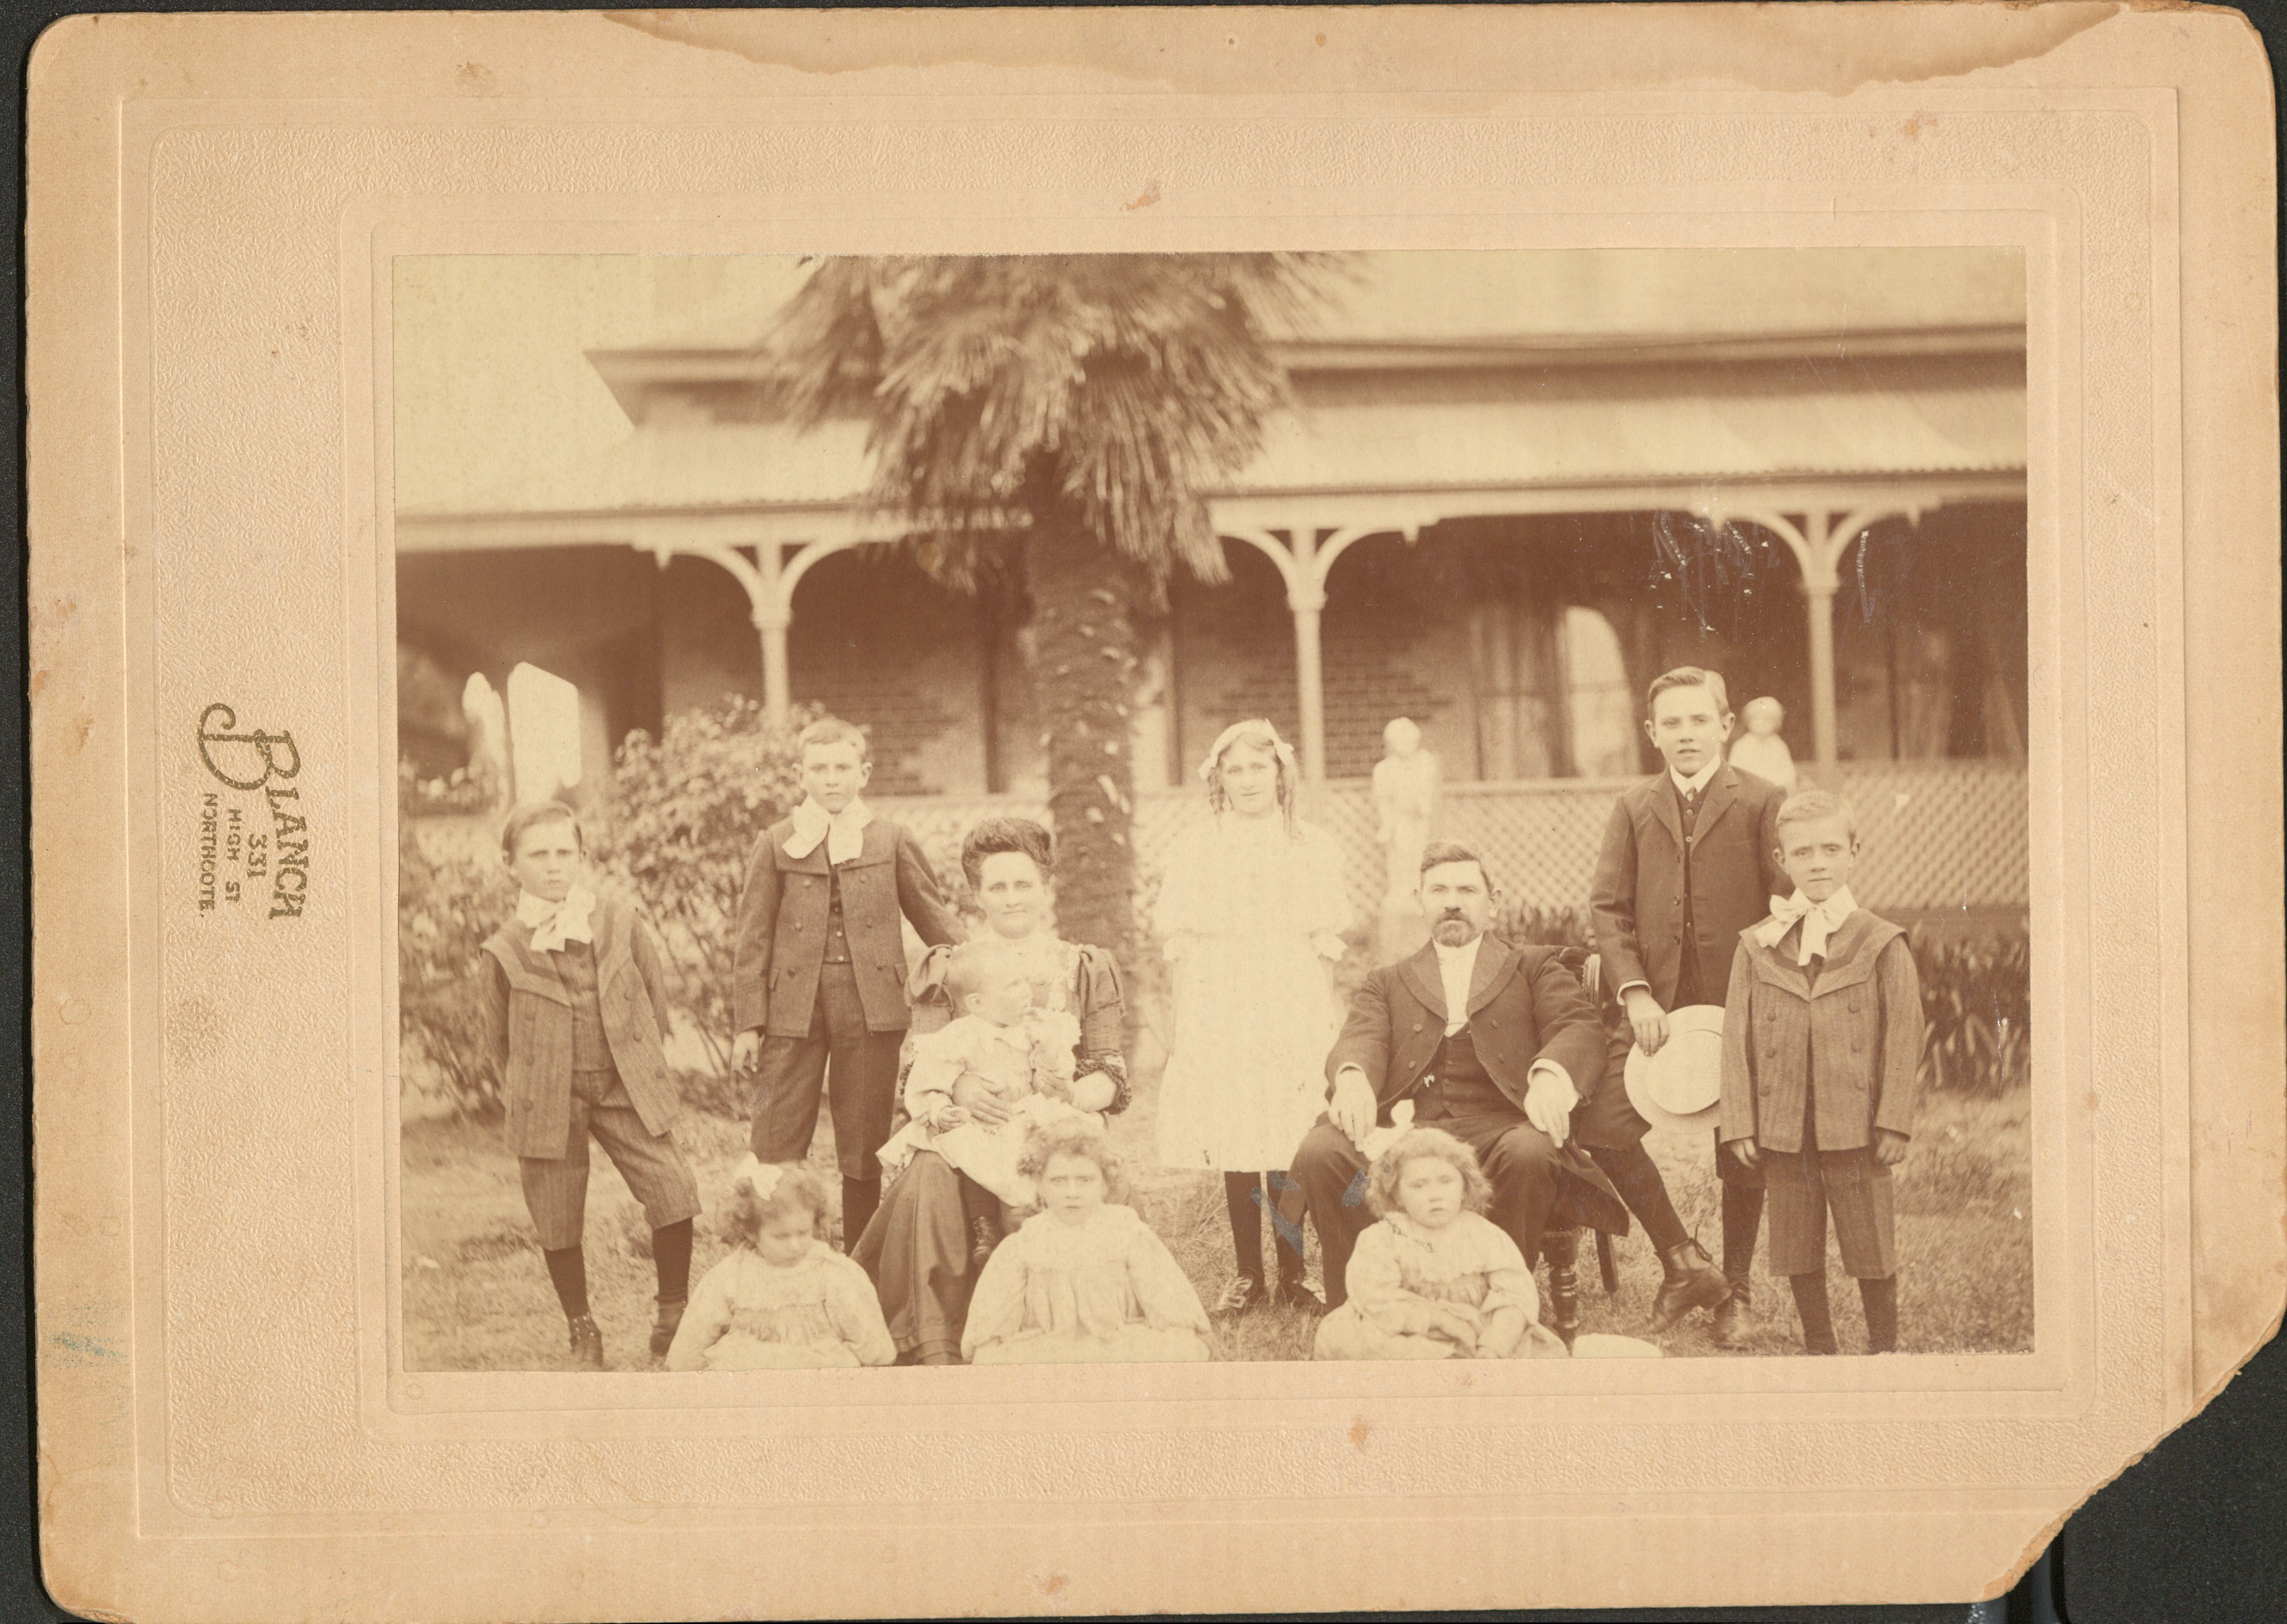 Image of Johnson family in 1907 on Bay View Street [LHRN5334]